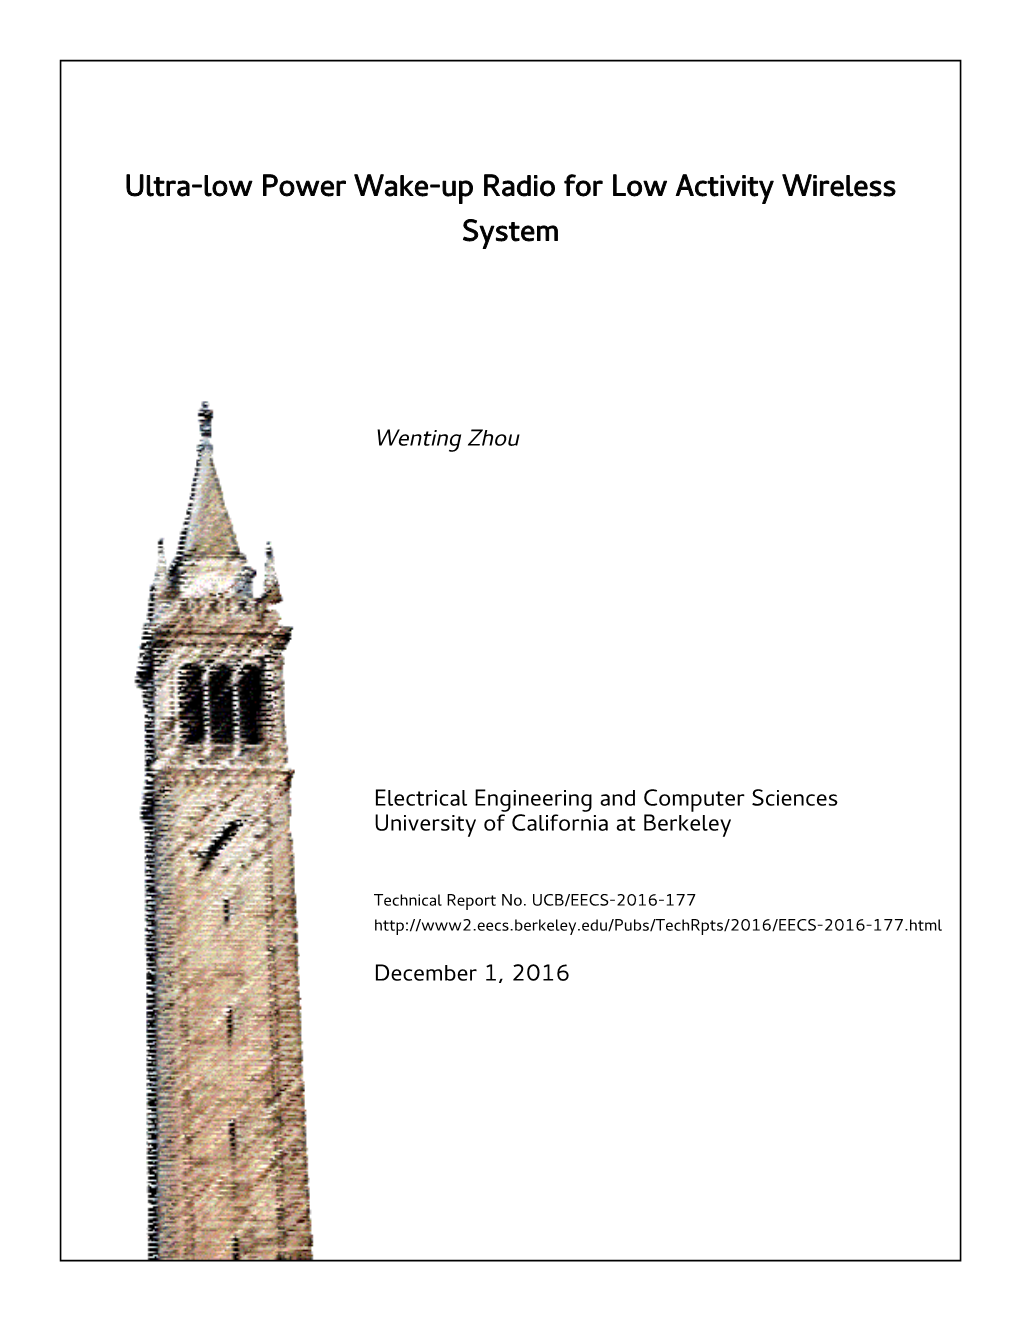 Ultra-Low Power Wake-Up Radio for Low Activity Wireless System